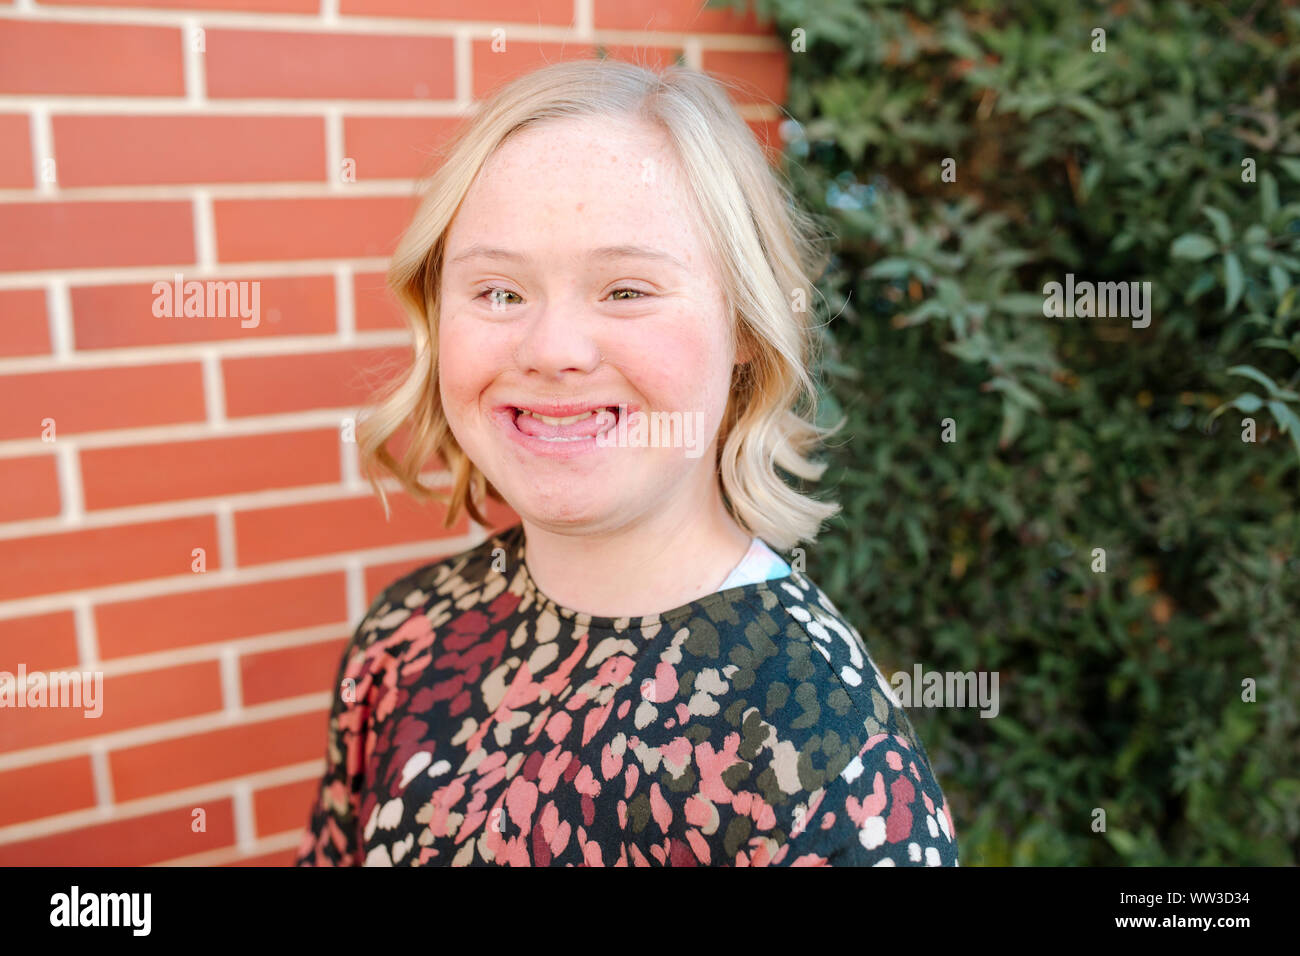 Smiling Teen Girl With Down Syndrome By Brick Wall In San Diego Stock Photo Alamy